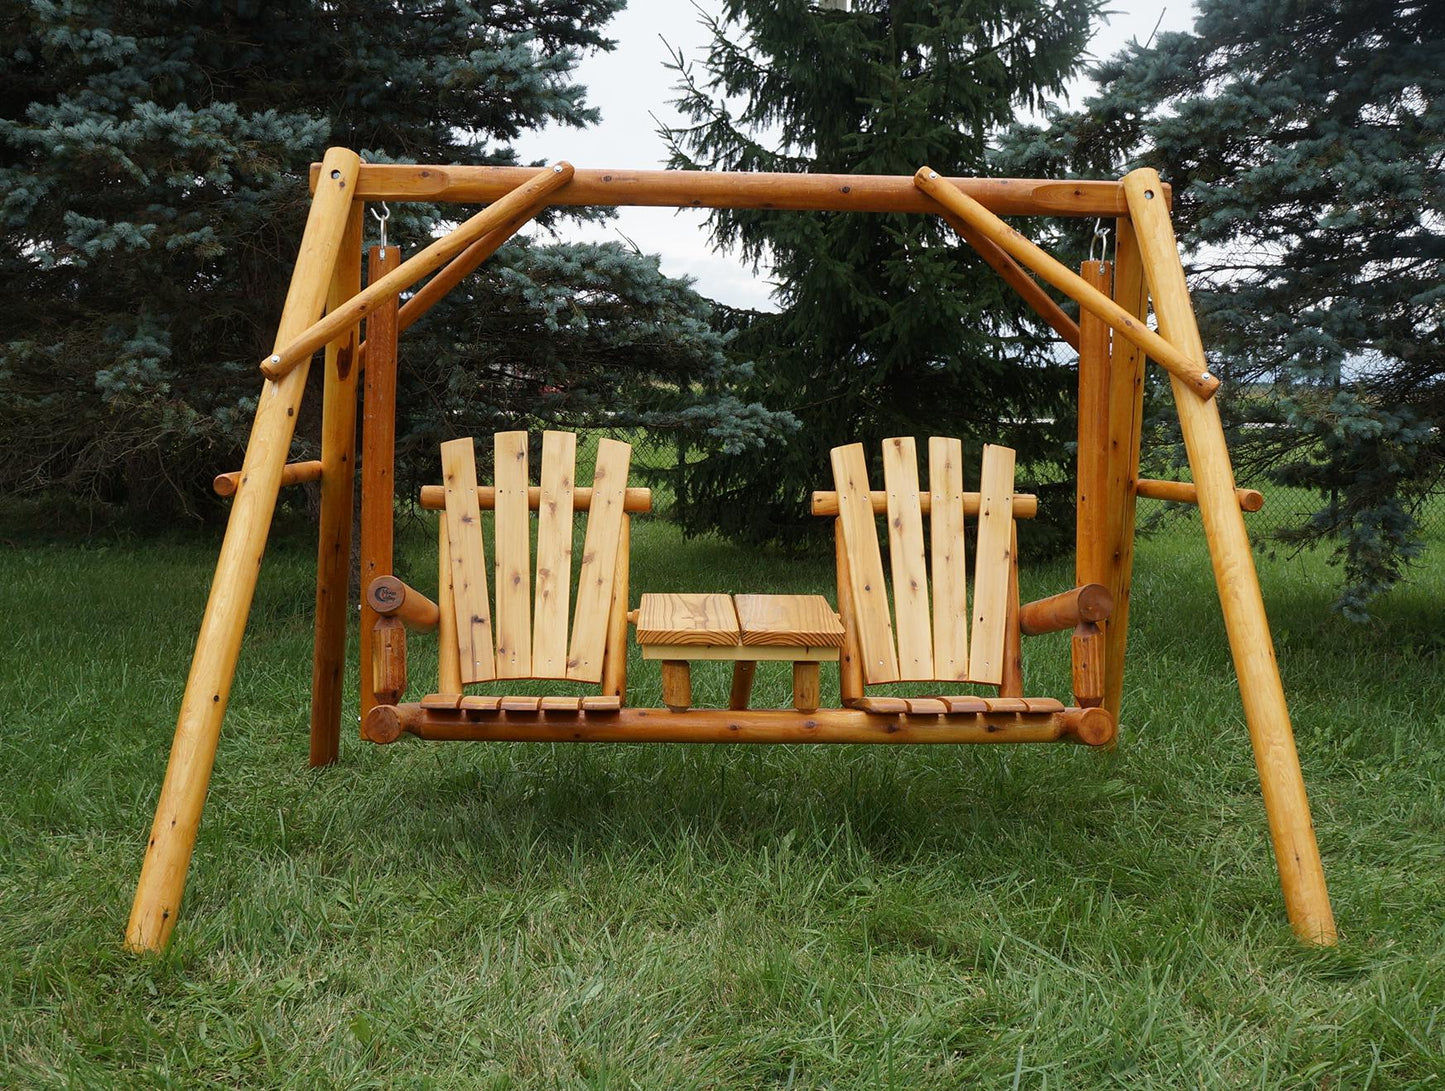 Moon Valley Rustic Tete-a-tete Lawn Swing - LEAD TIME TO SHIP 3 TO 4 WEEKS - LEAD TIME TO SHIP 4 WEEKS OR LESS